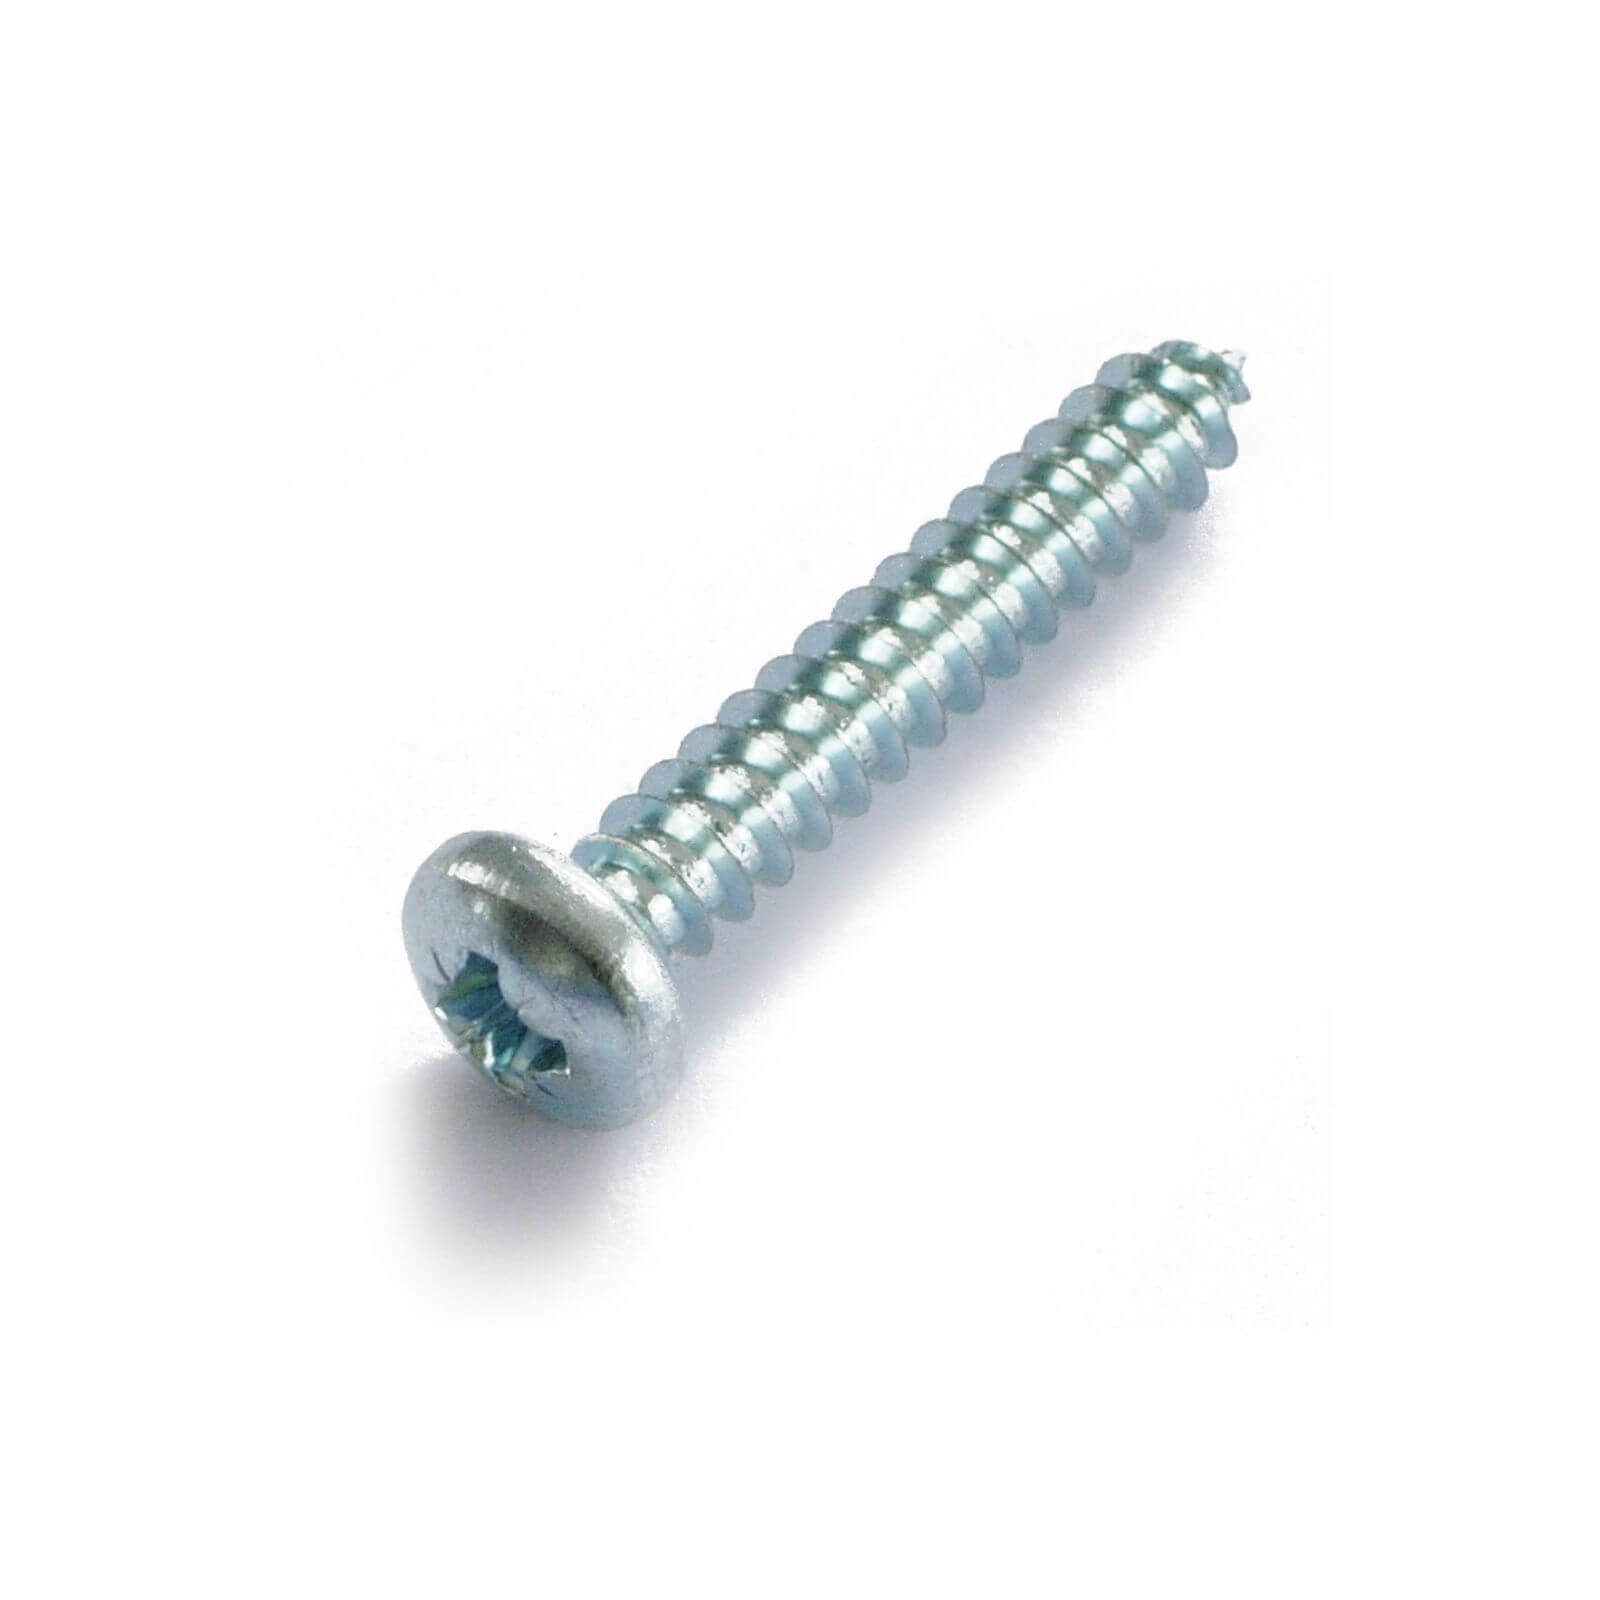 Self Tapping Screw - Bright Zinc Plated - 4 x 16mm - 10 Pack